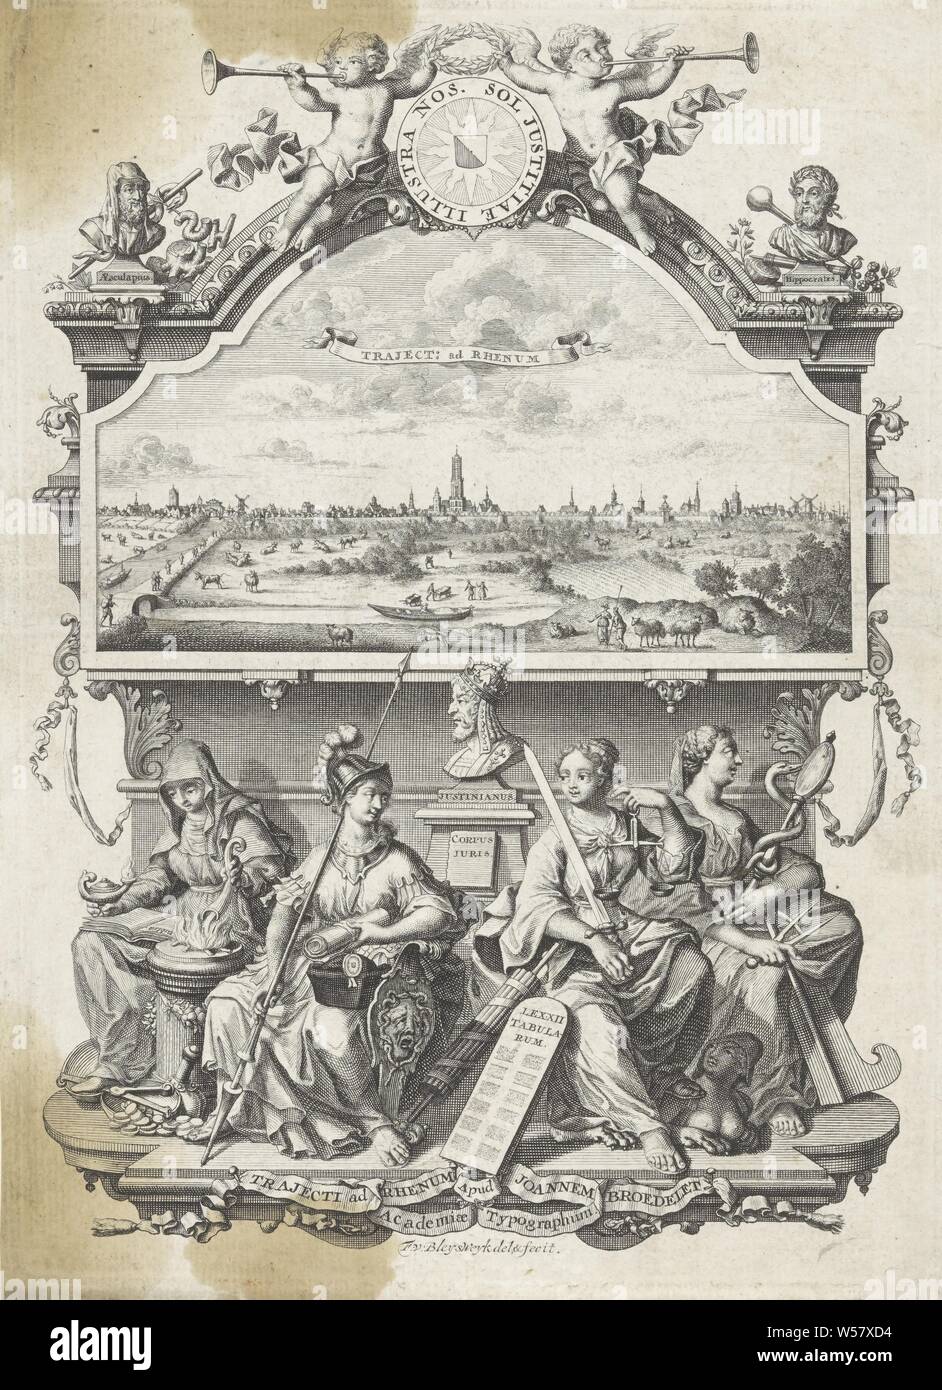 View of Utrecht and allegory with Minerva and virtues, A view of the city of Utrecht with the silhouette of the Dom church in an architectural setting with the goddess Minerva and three personifications of virtues: Temperance, Justice and Caution. The list is crowned with a round shield with the motto of the University of Utrecht between two putti blowing on trumpets, (story of) Minerva (Pallas, Athena), Prudence, 'Prudentia', 'Prudenza' (Ripa), one of the Four Cardinal Virtues, Temperance, 'Temperantia', 'Temperanza' (Ripa), Justice, 'Justitia', 'Giustitia divina' (Ripa), Utrecht, François Stock Photo